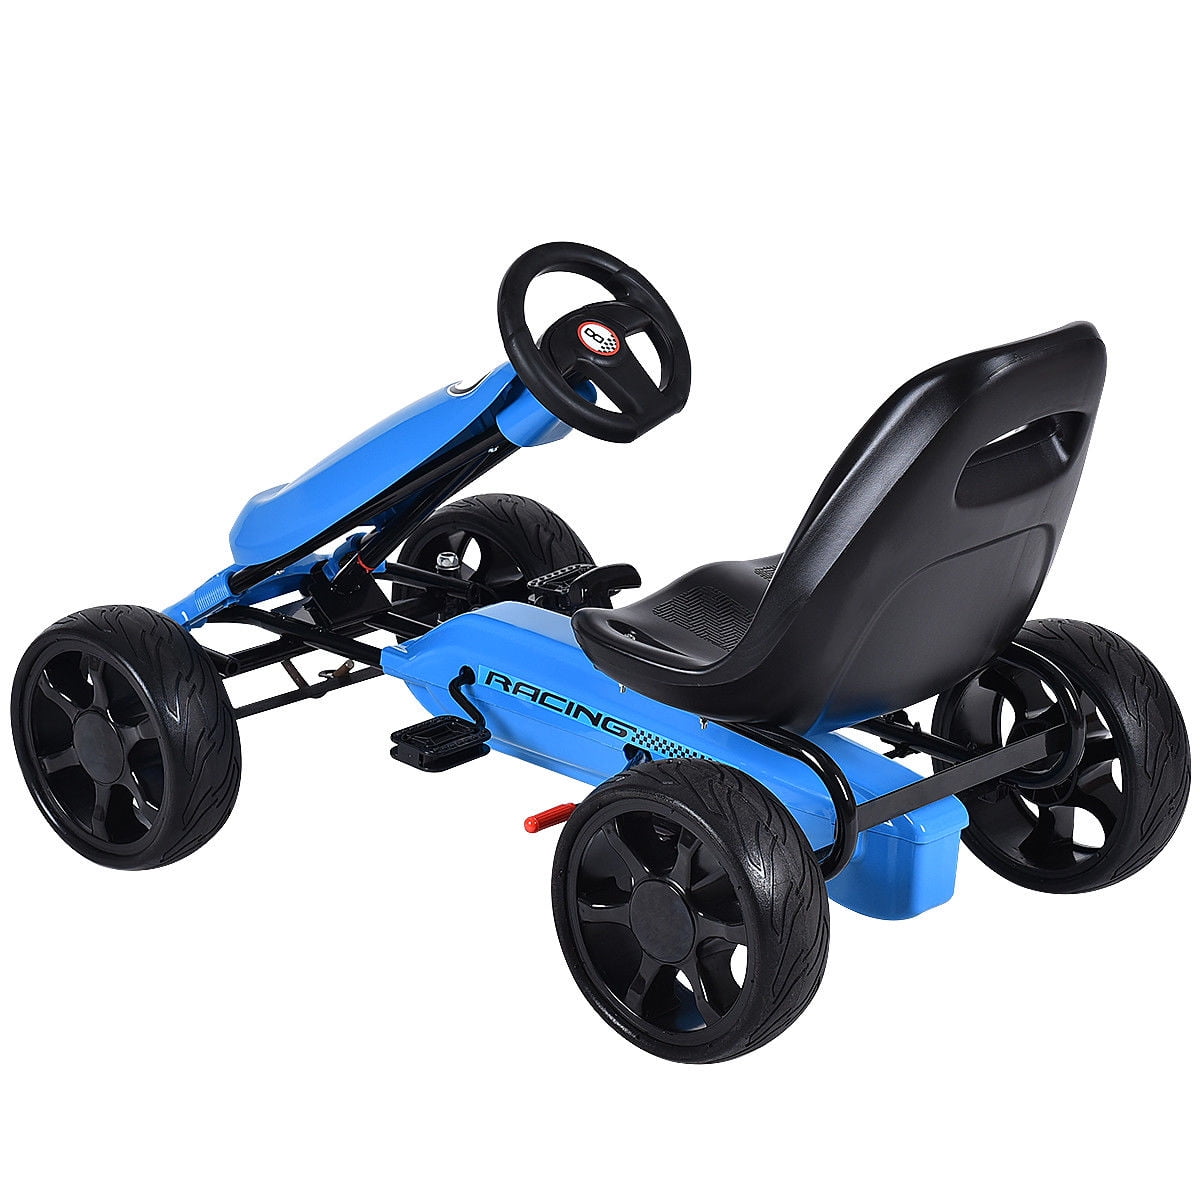 Ride On Pedal Car for Boys 4 Wheel Pedal Powered Ride On Outdoor Racer with Adjustable Seat Brake Green Costzon Kids Go Kart Rubber Wheels Girls 